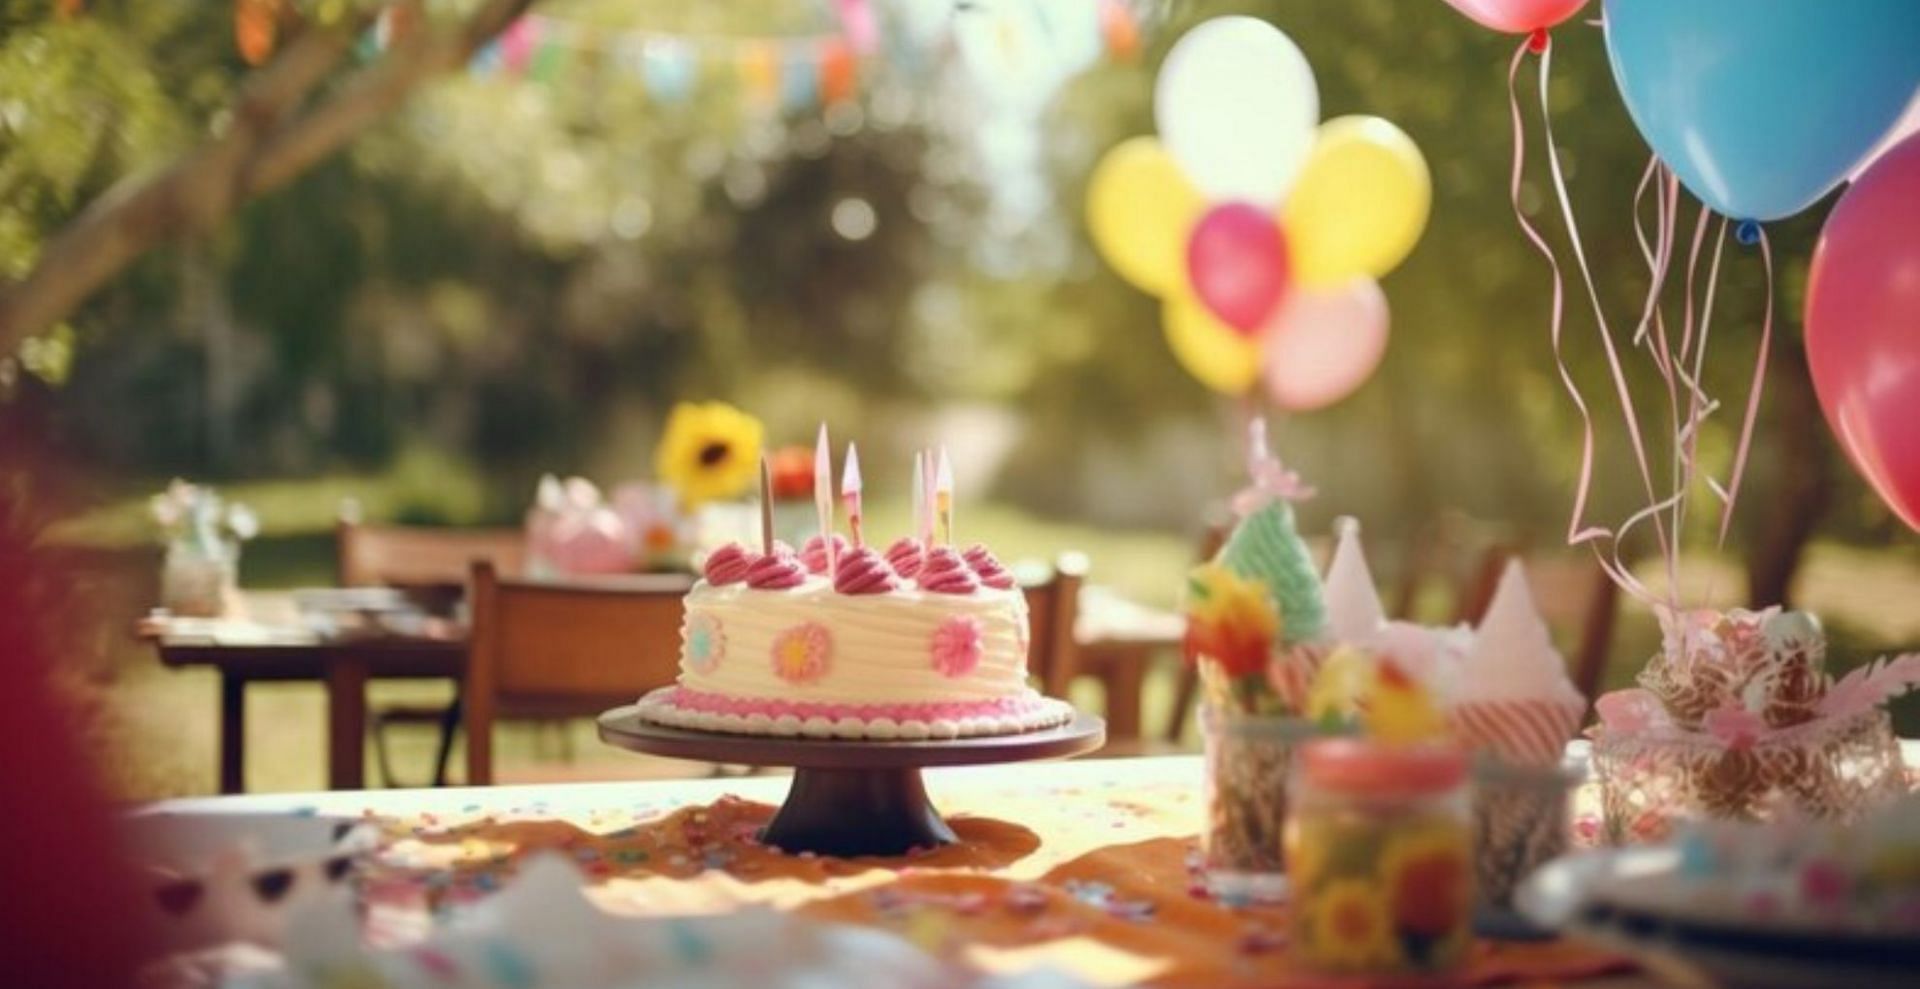 7 Ways to decorate terrace for small Birthday party